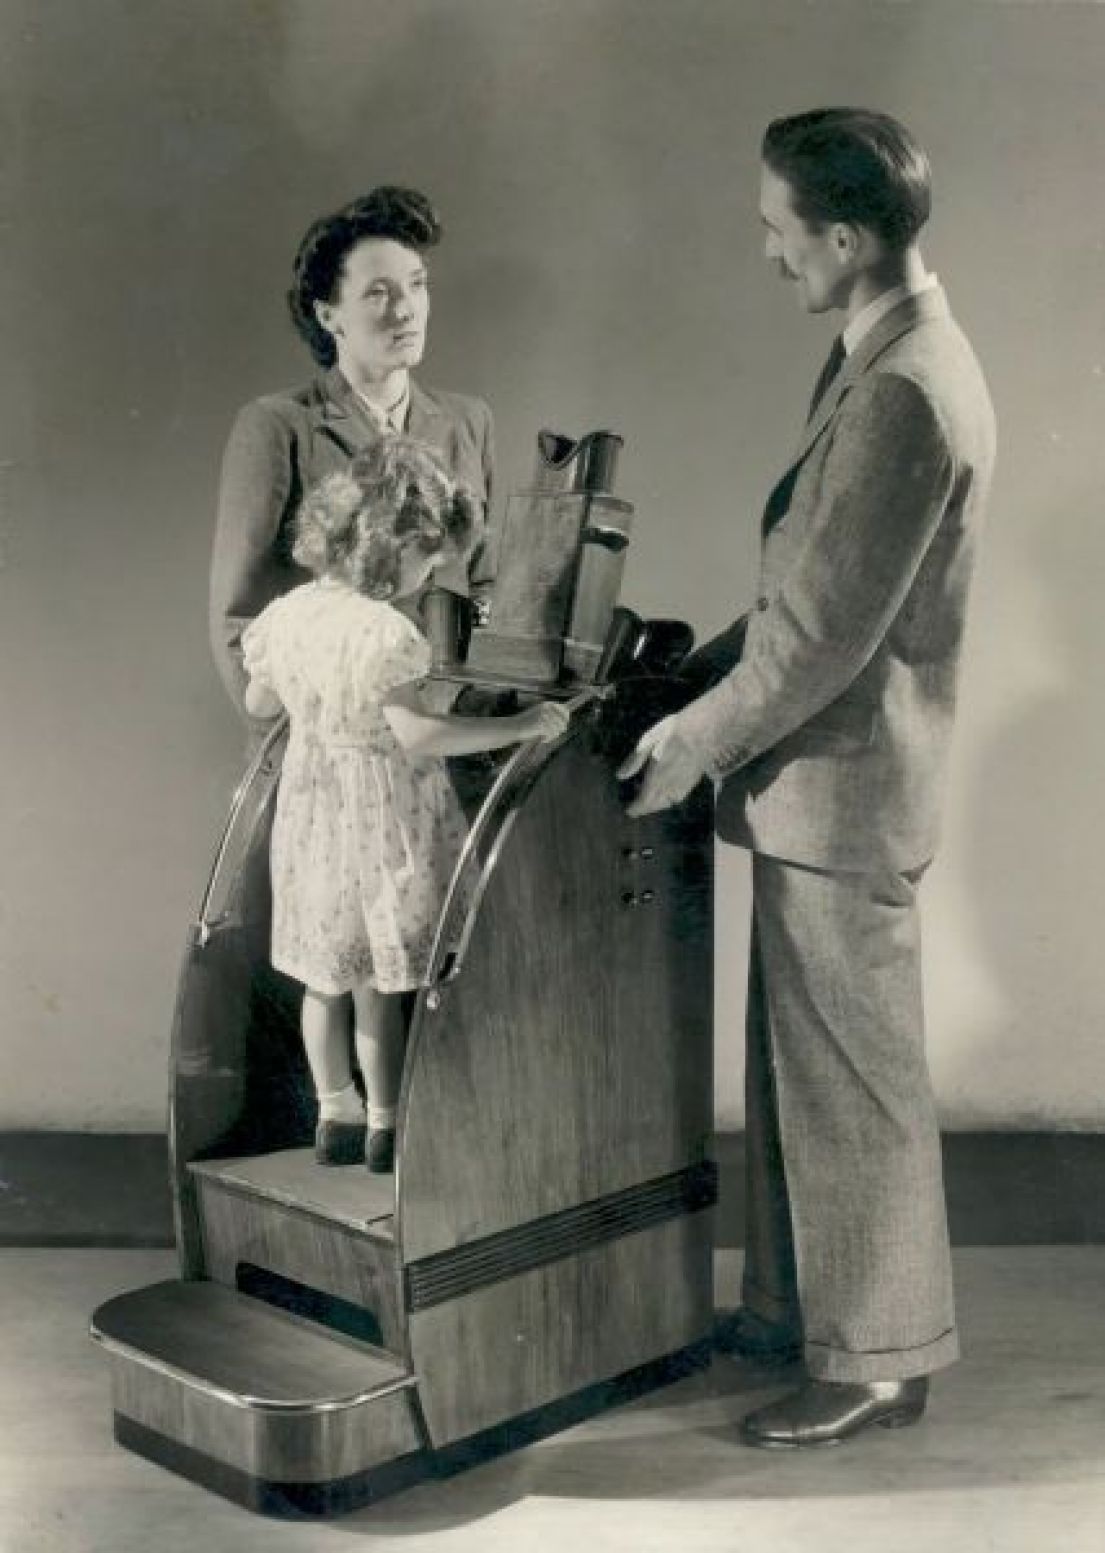 A small child stood on a portable x-ray machine on a small platform, which measures her feet. To each side of the x-ray are two adults.